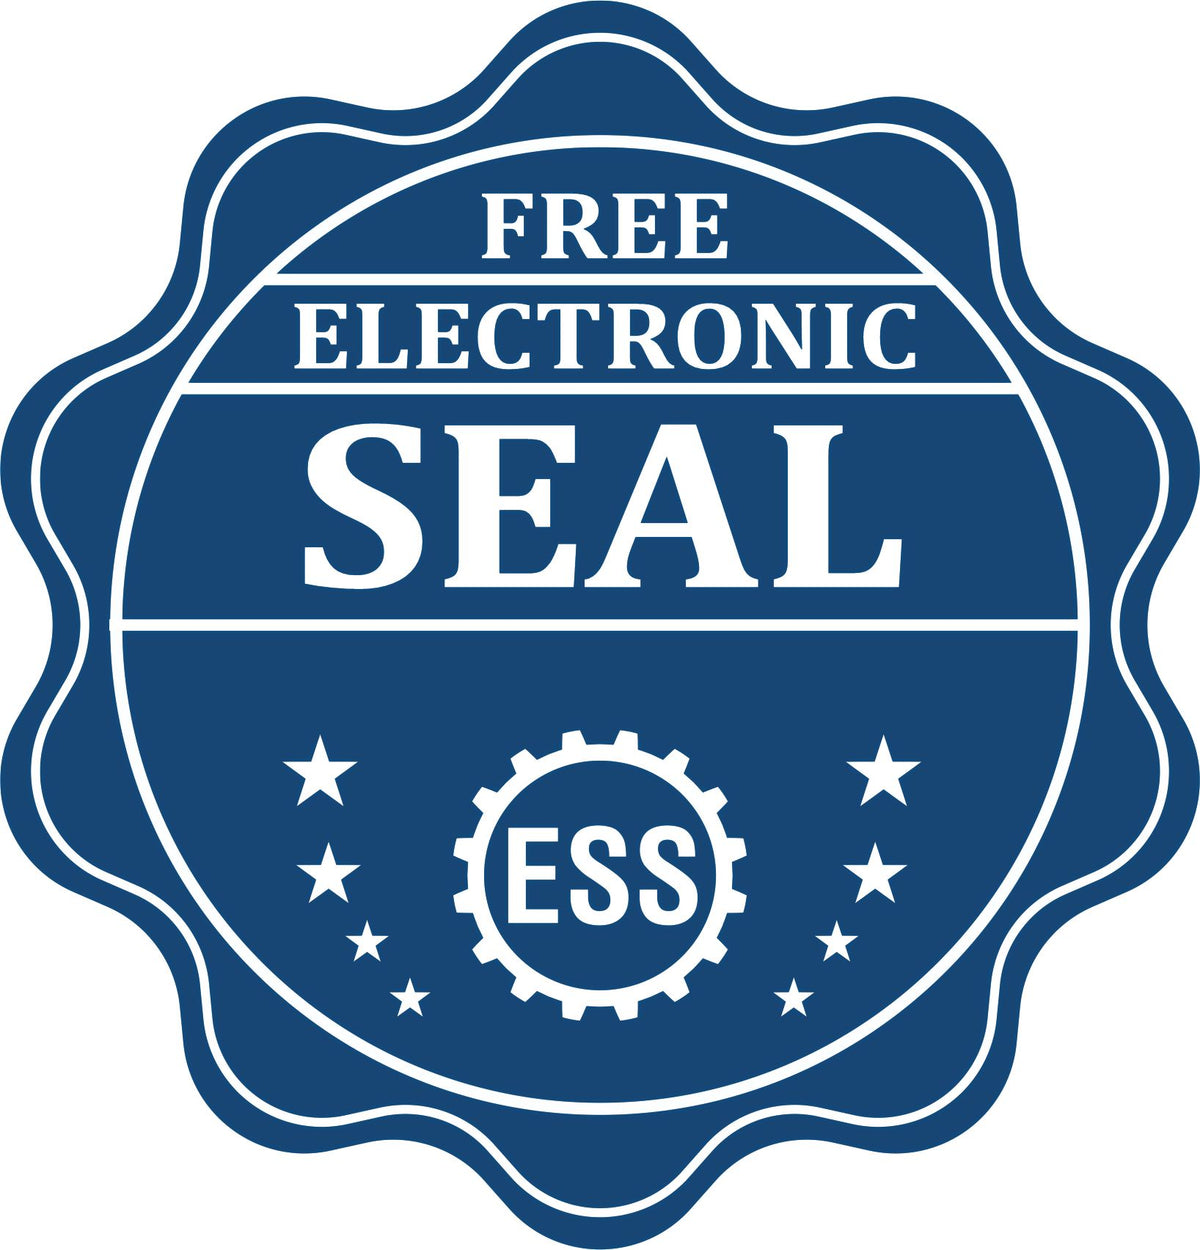 A badge showing a free electronic seal for the Long Reach Delaware Geology Seal with stars and the ESS gear on the emblem.